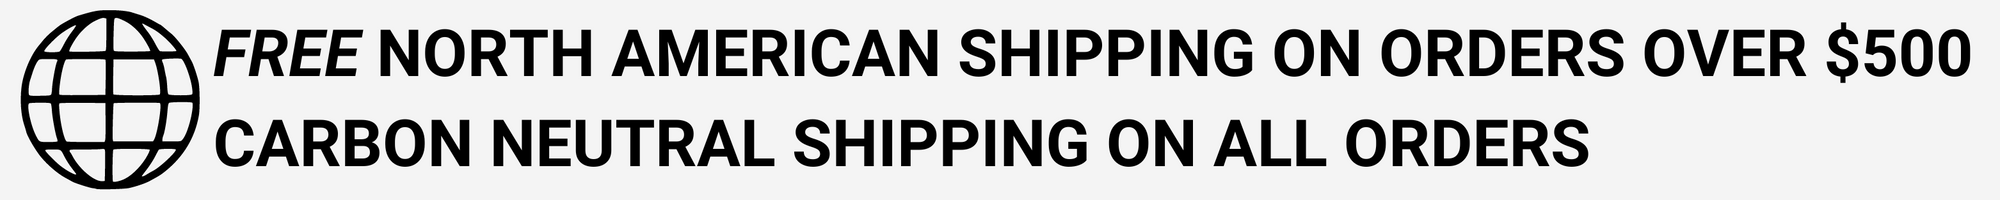 Free Shipping on all North American orders over $500